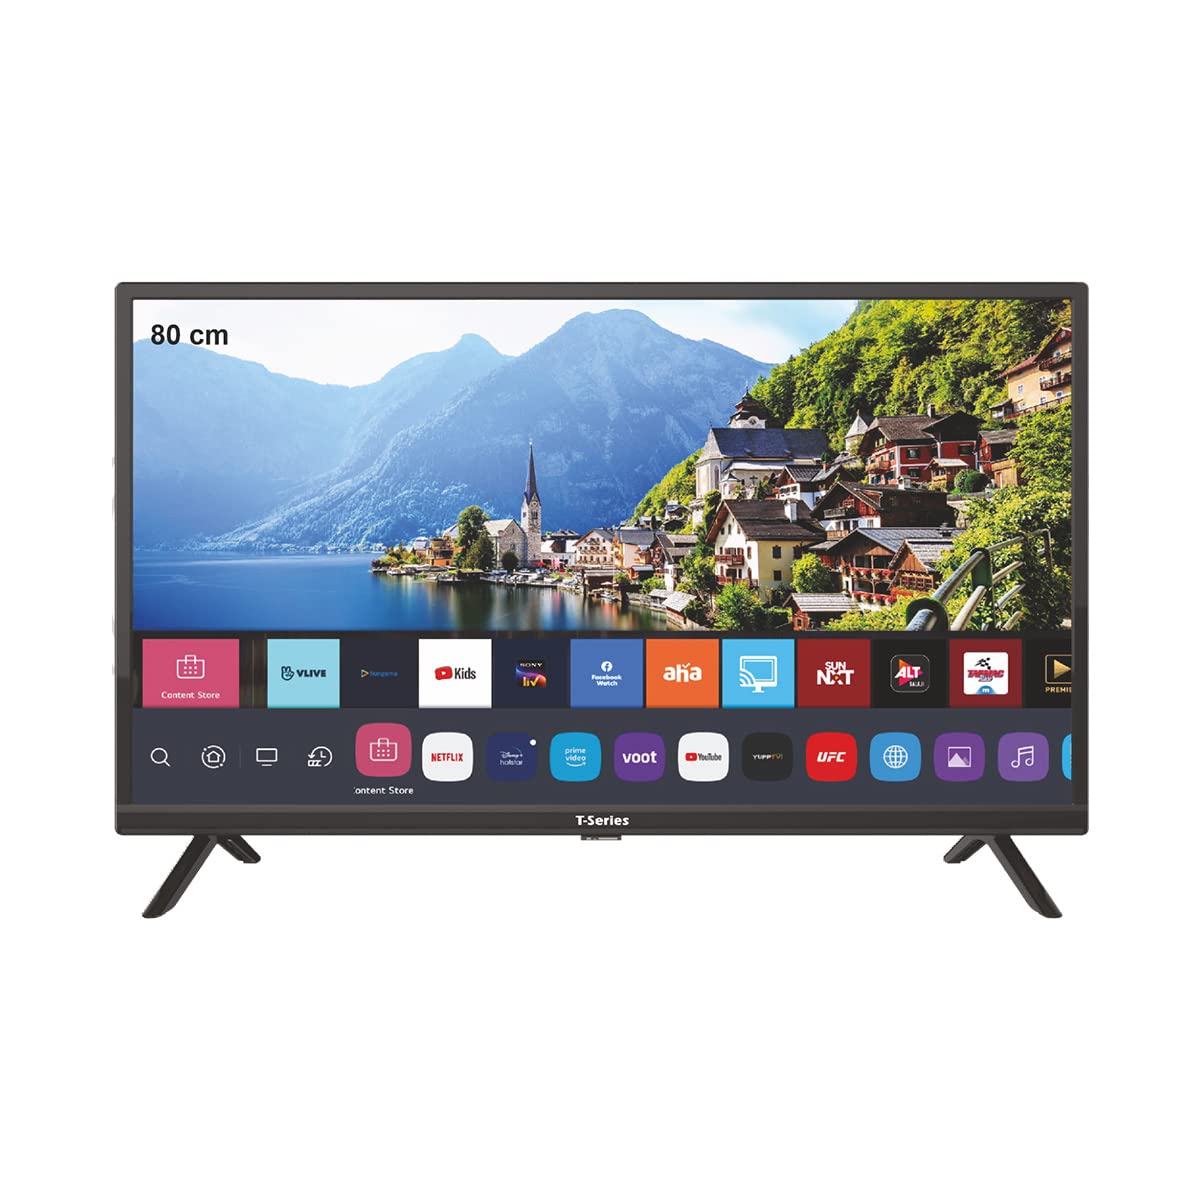 T-Series 80 cm (32 inch) HD Ready LED Smart Android TV (32TWO 300H) WebOS